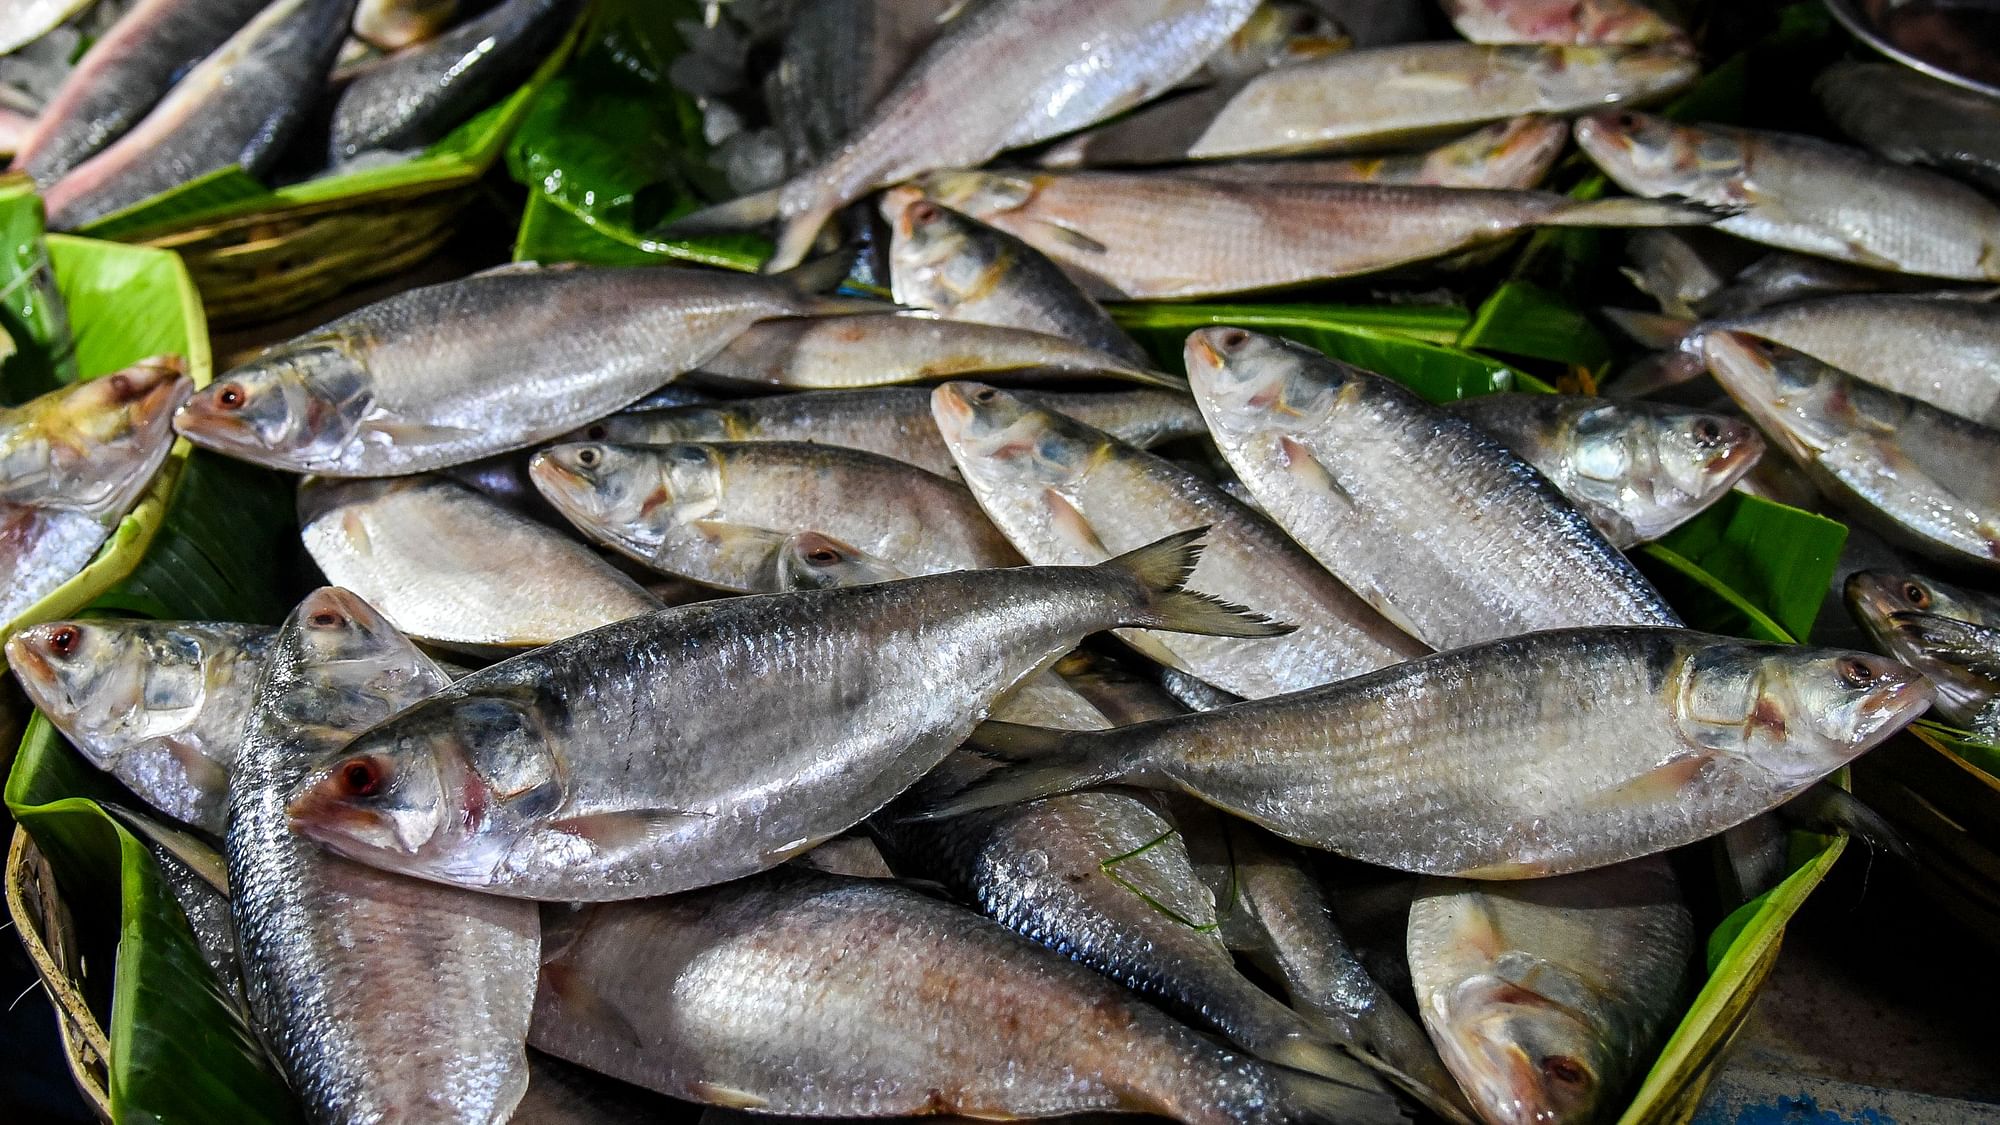 Bengal’s favourite fish, Hilsa, could soon be extinct as overfishing declines natural fish stock in Northern Bay of Bengal.